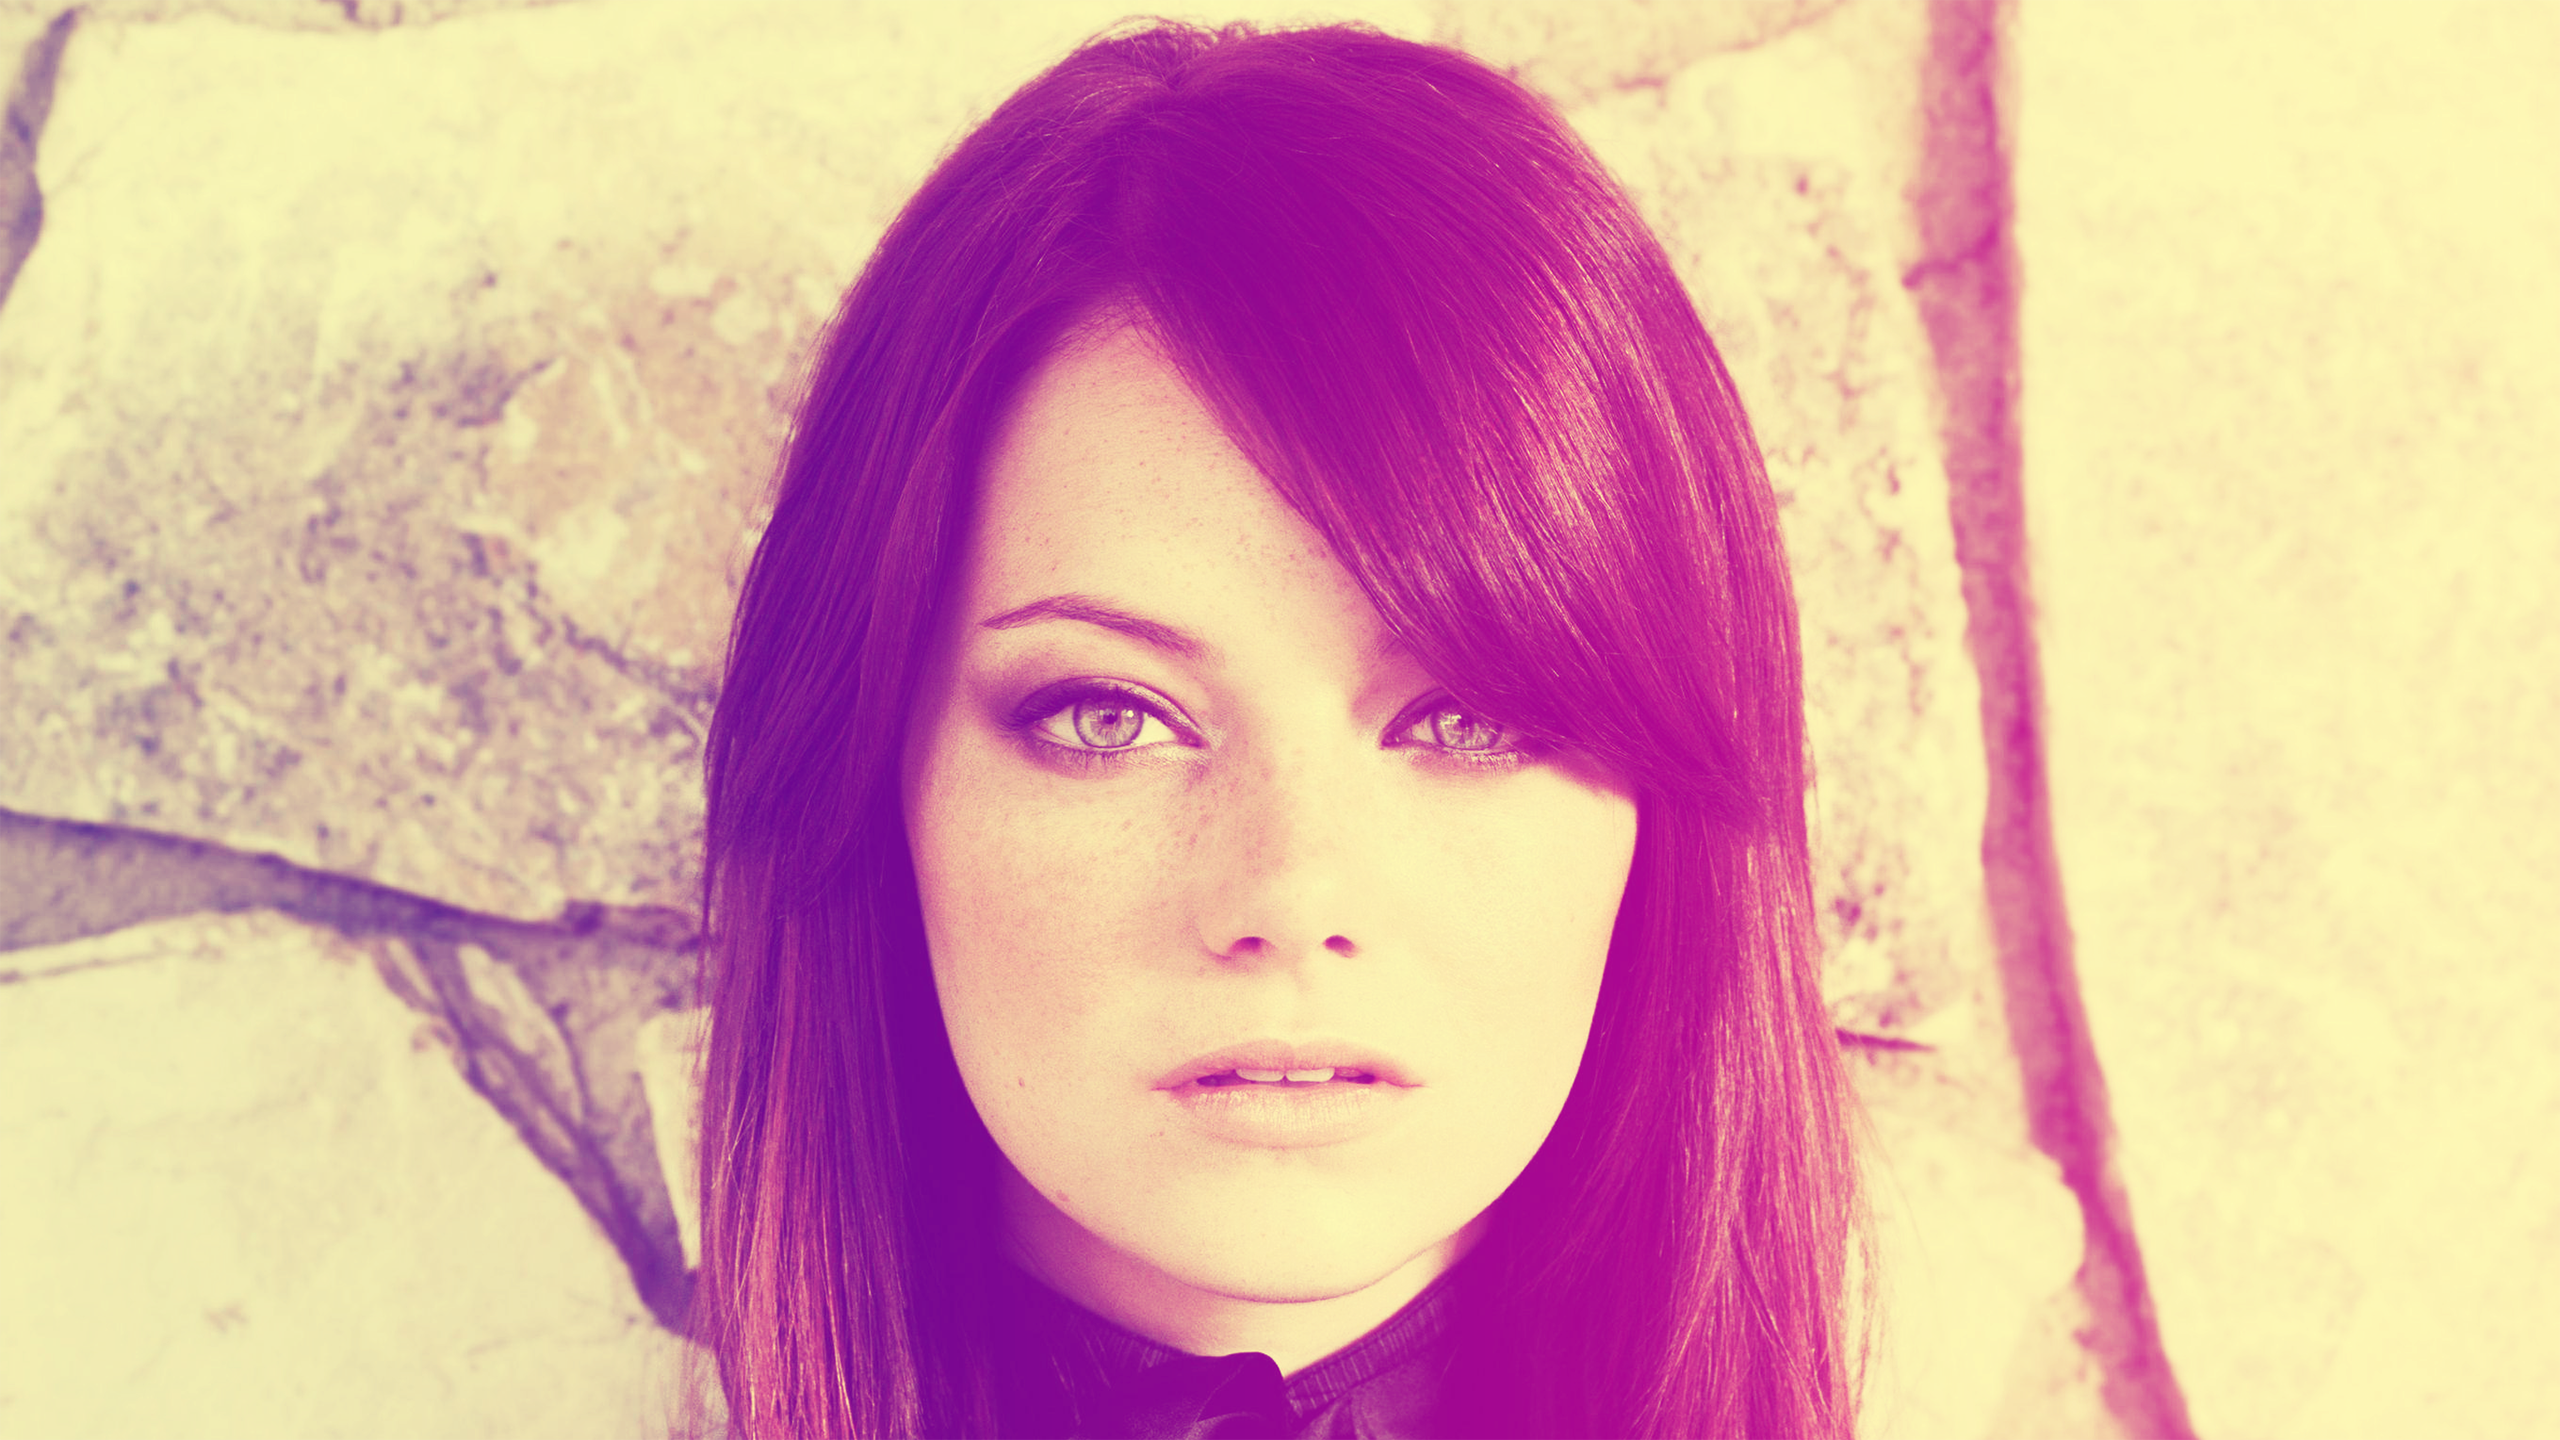 People 2560x1440 Emma Stone women actress face celebrity portrait straight hair looking at viewer photo manipulation